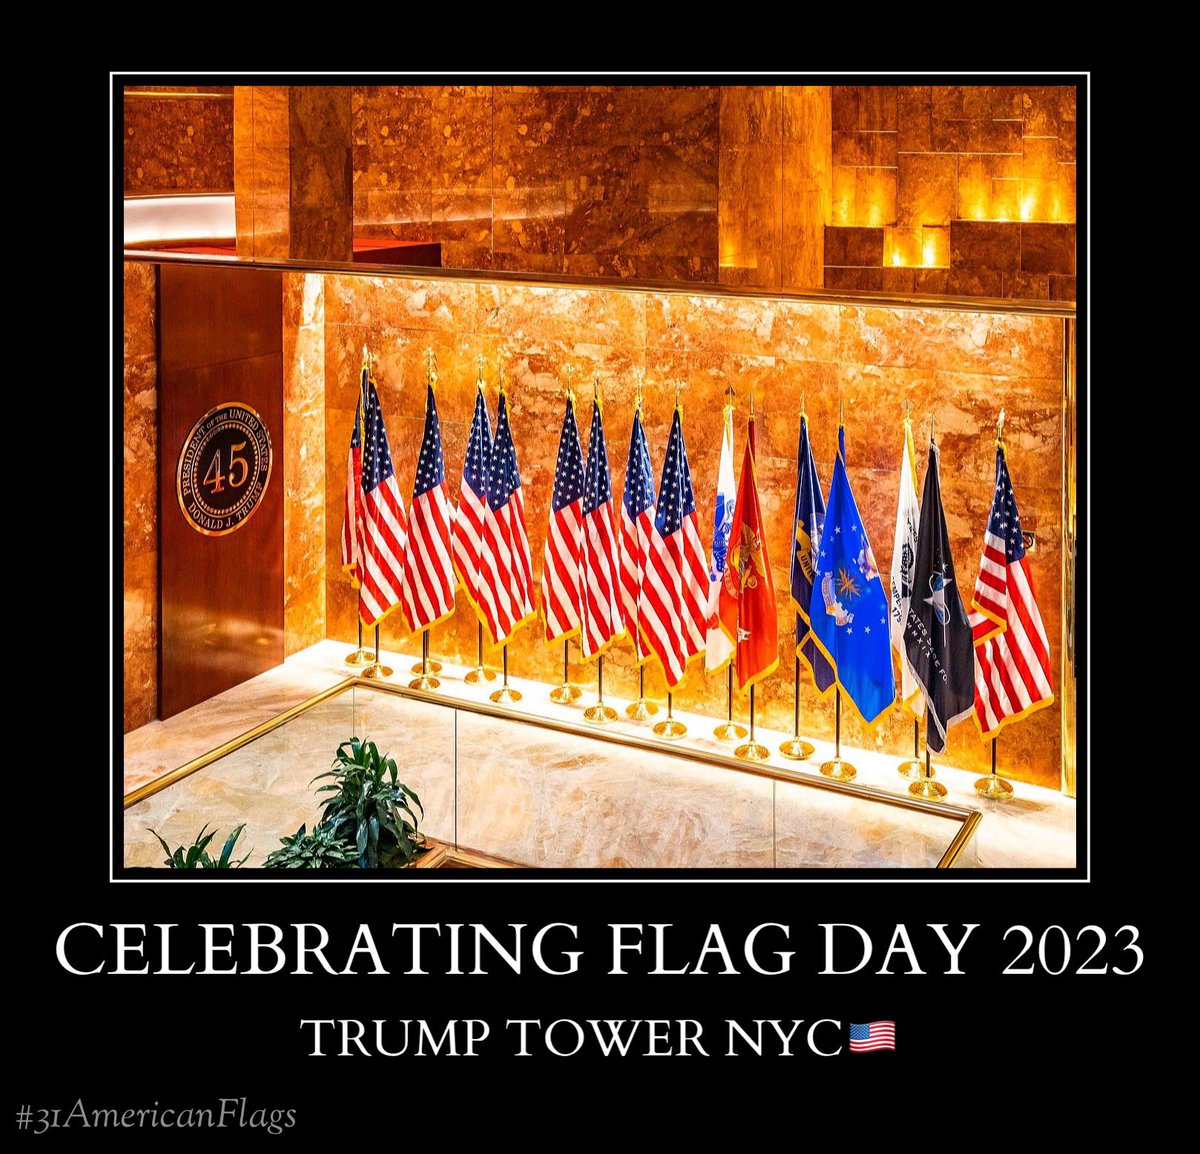 Patriotism & celebration on display for 45 @Trump Tower June 14, 2023.  

Our flag, long may She wave! 🇺🇸
#31americanflags #patriotism #kenthrives #GodBlessAmerica #ProudAmerican #thrivepatriot